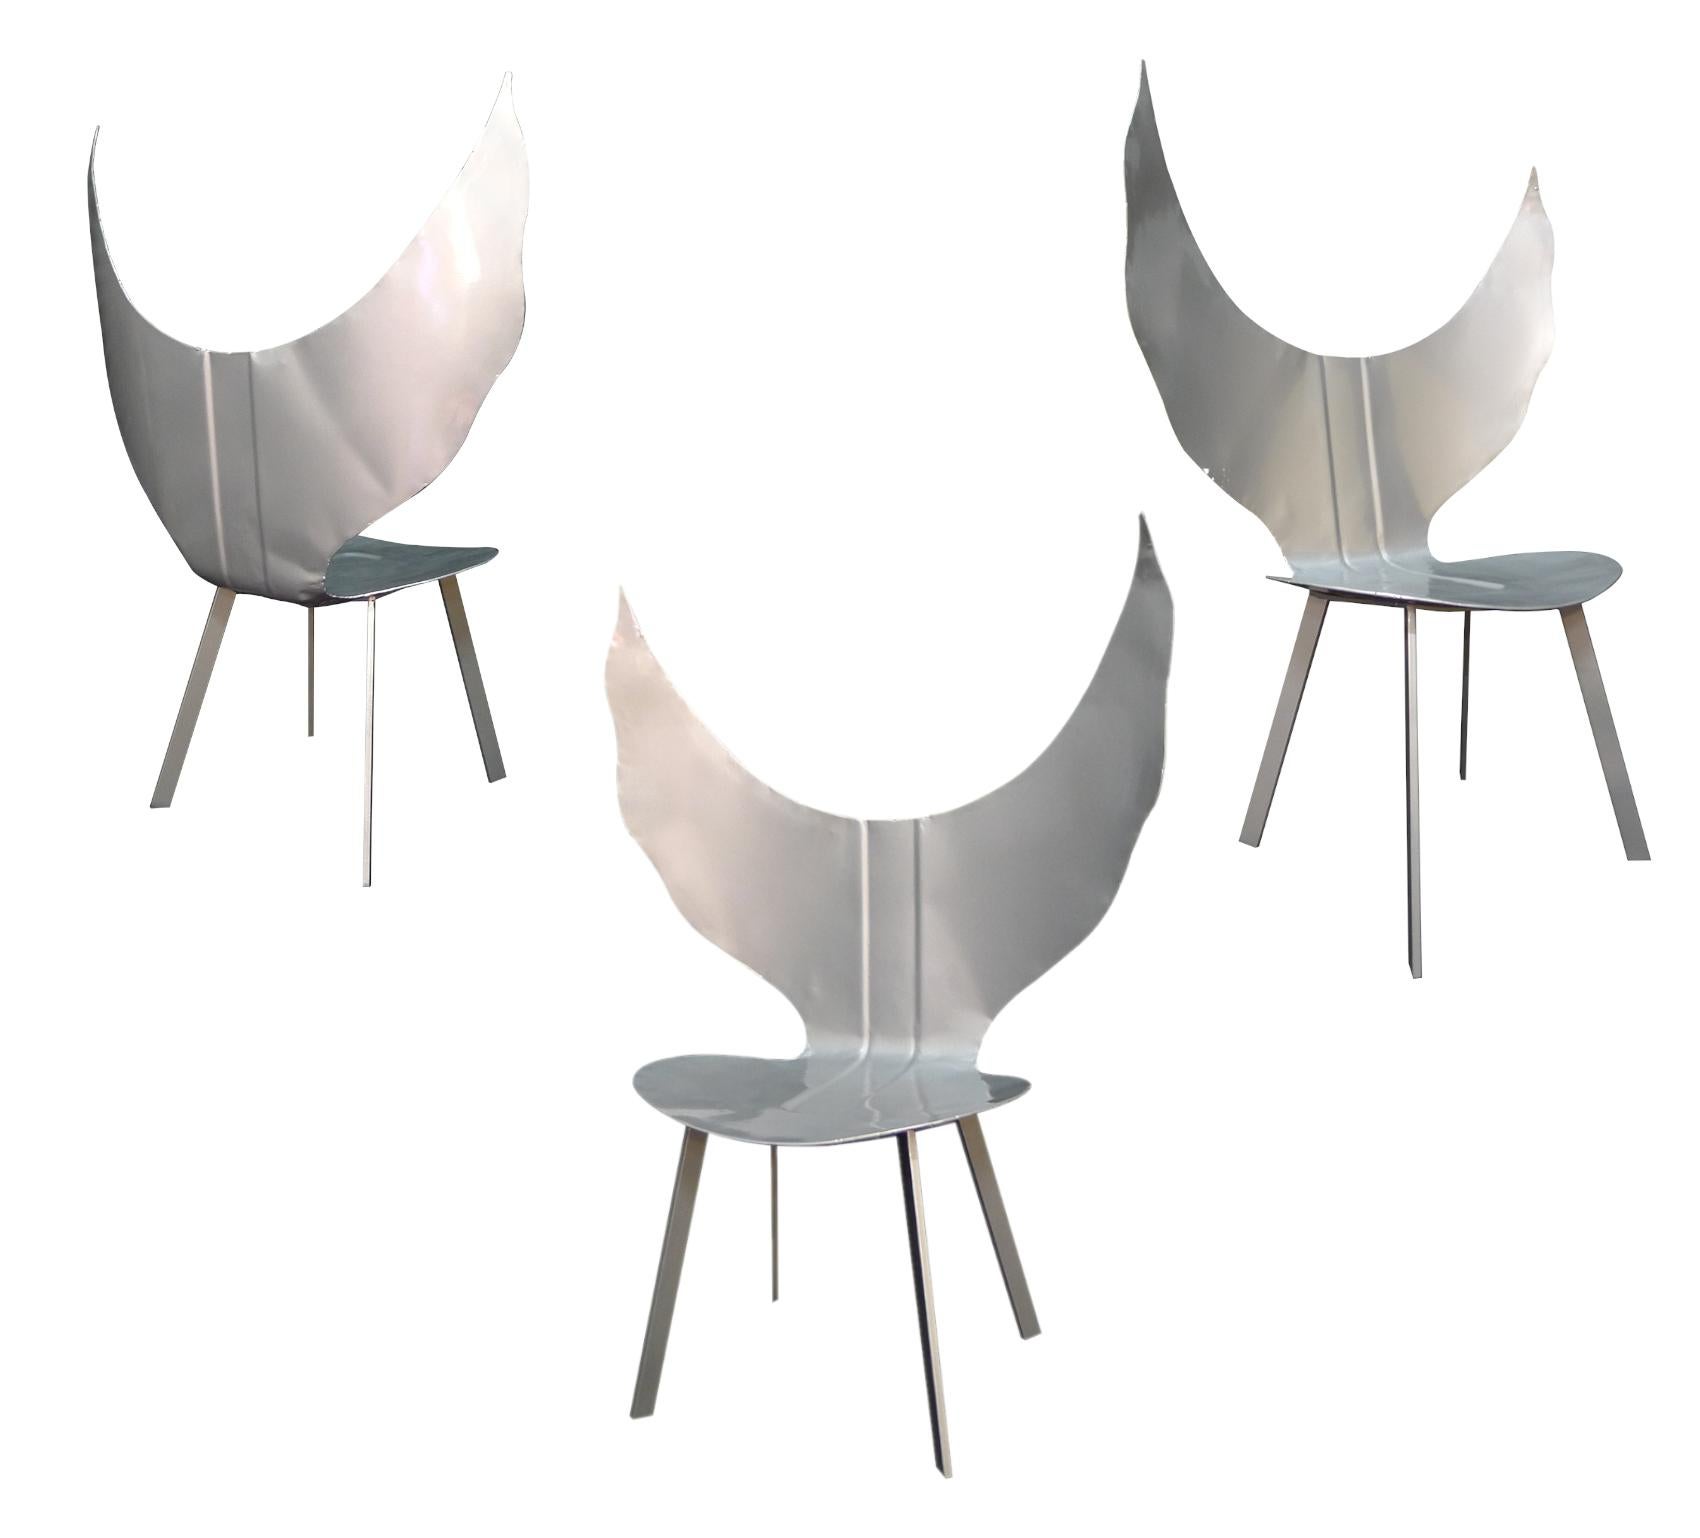 Brazilian Contemporary Angel Chair from 